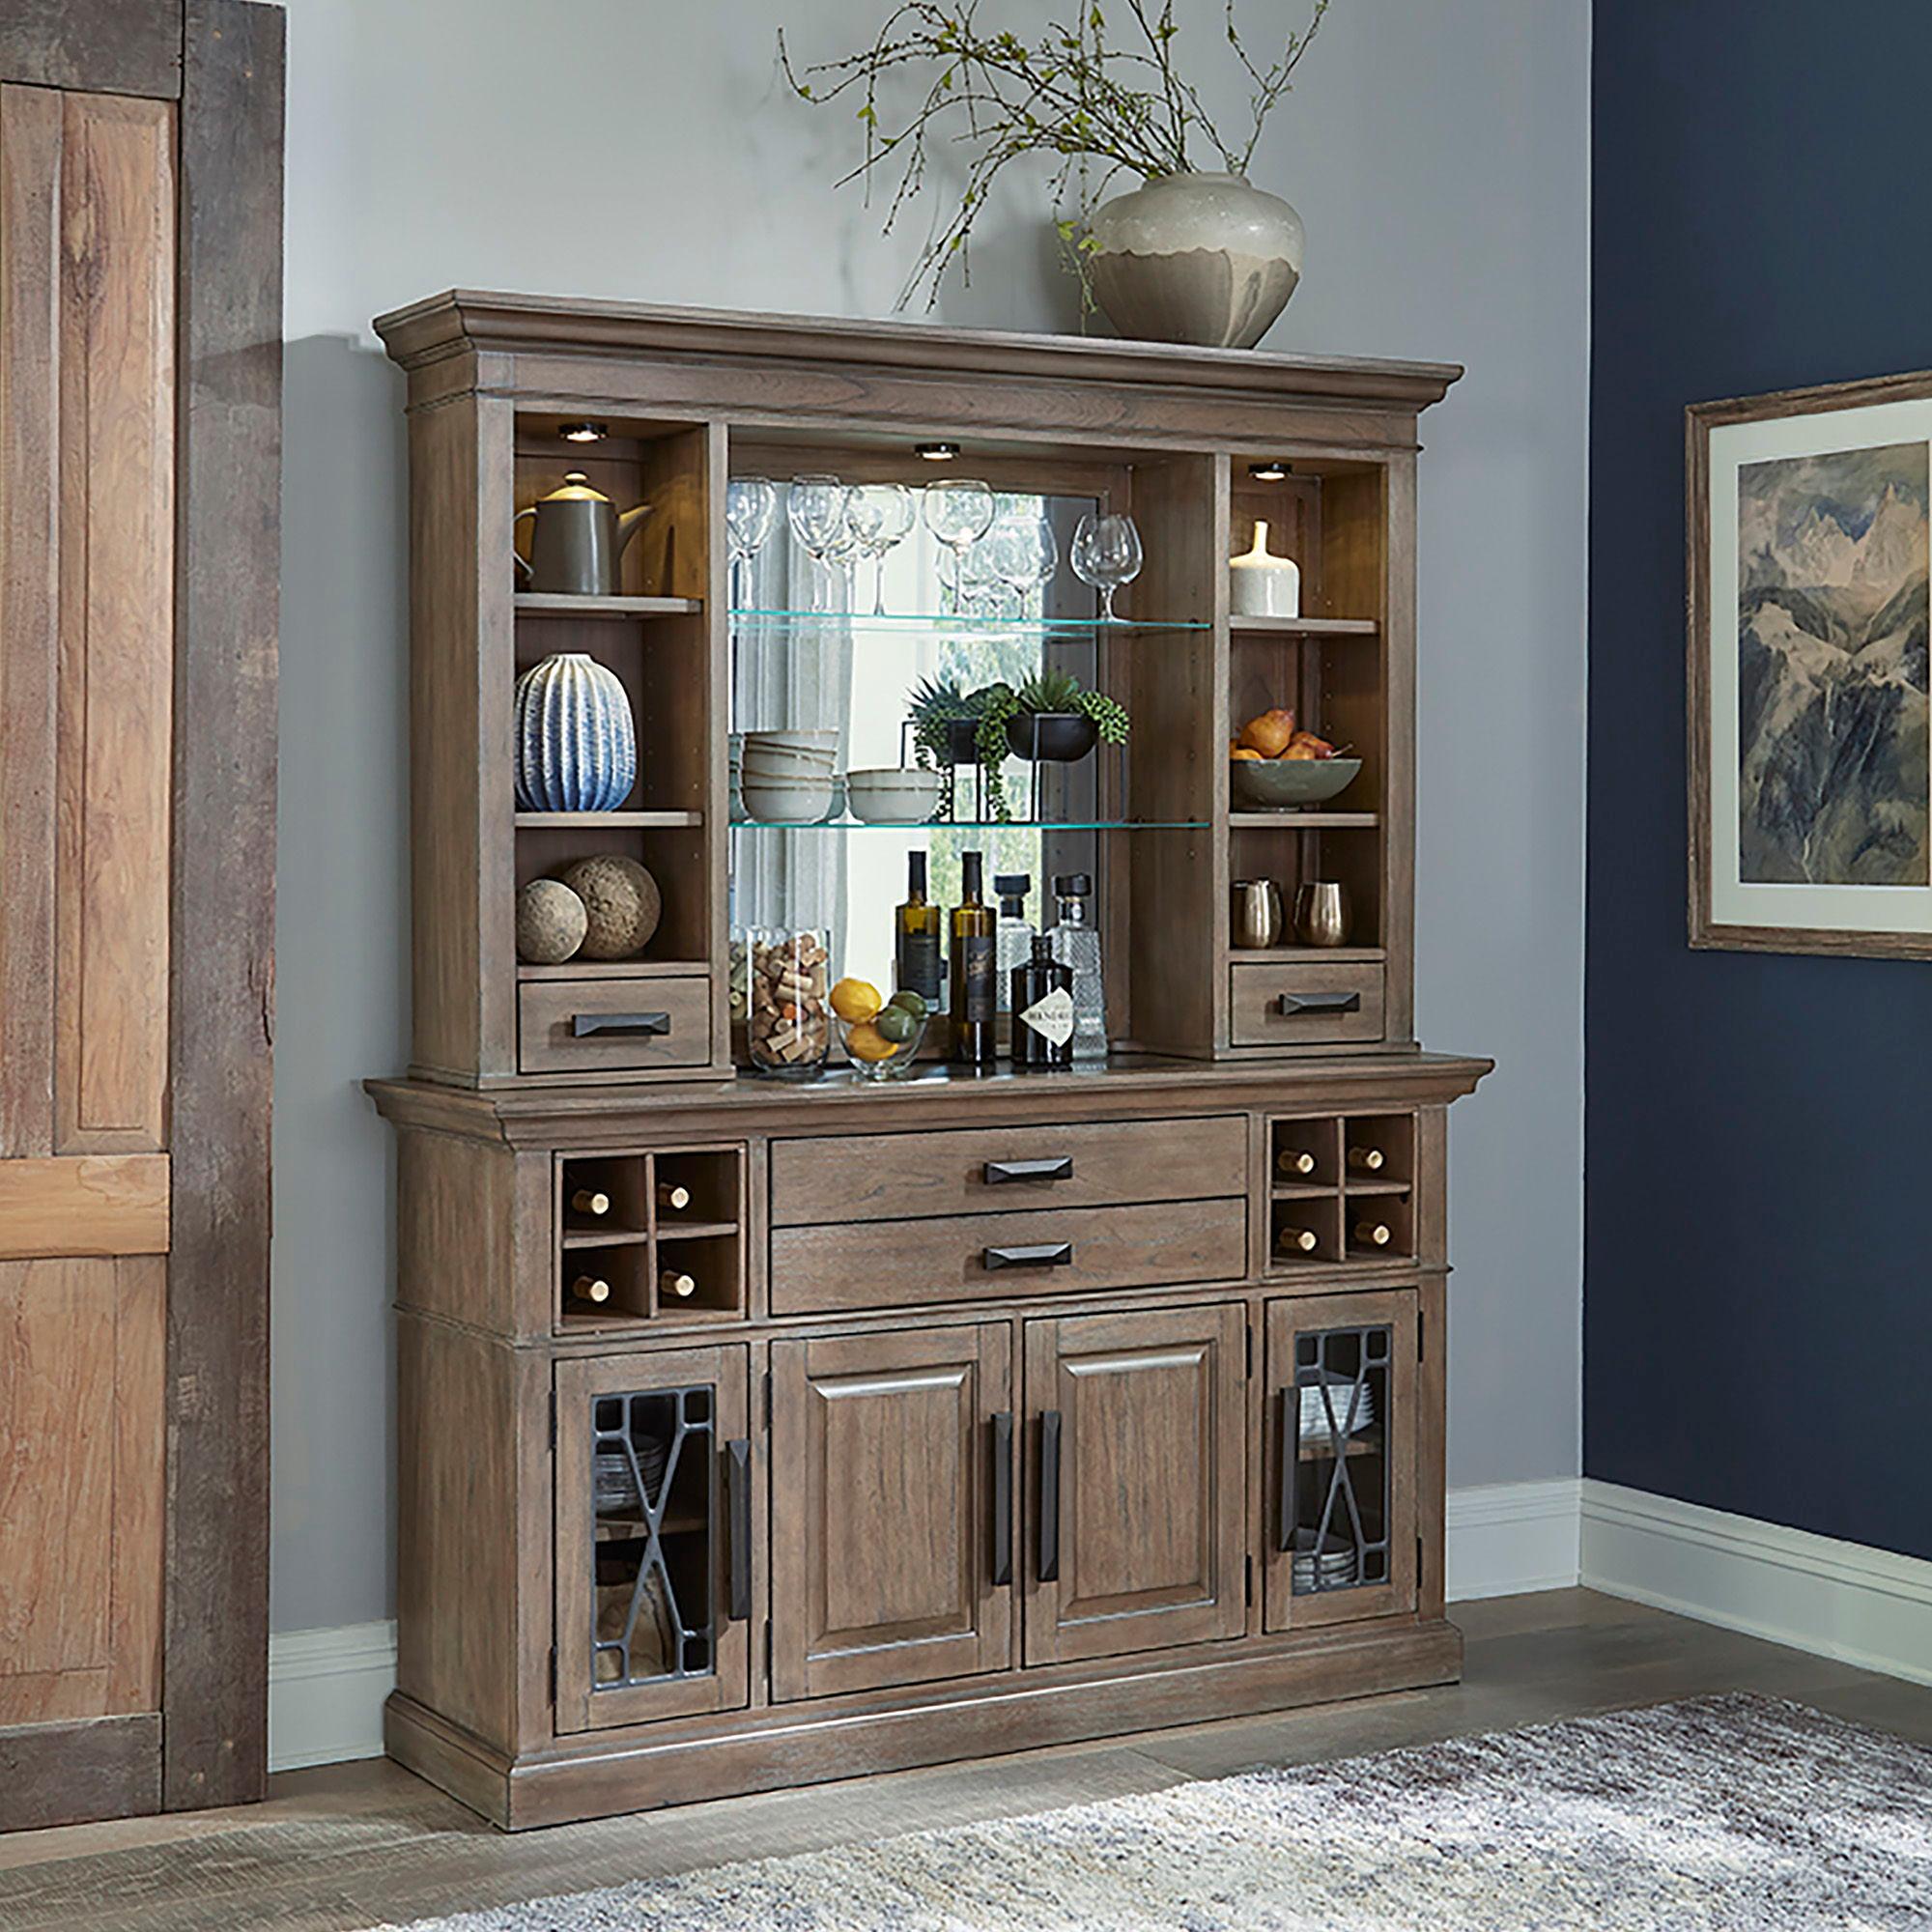 Parker House - Sundance Dining - Buffet and Bar Display Hutch - Sandstone - 5th Avenue Furniture